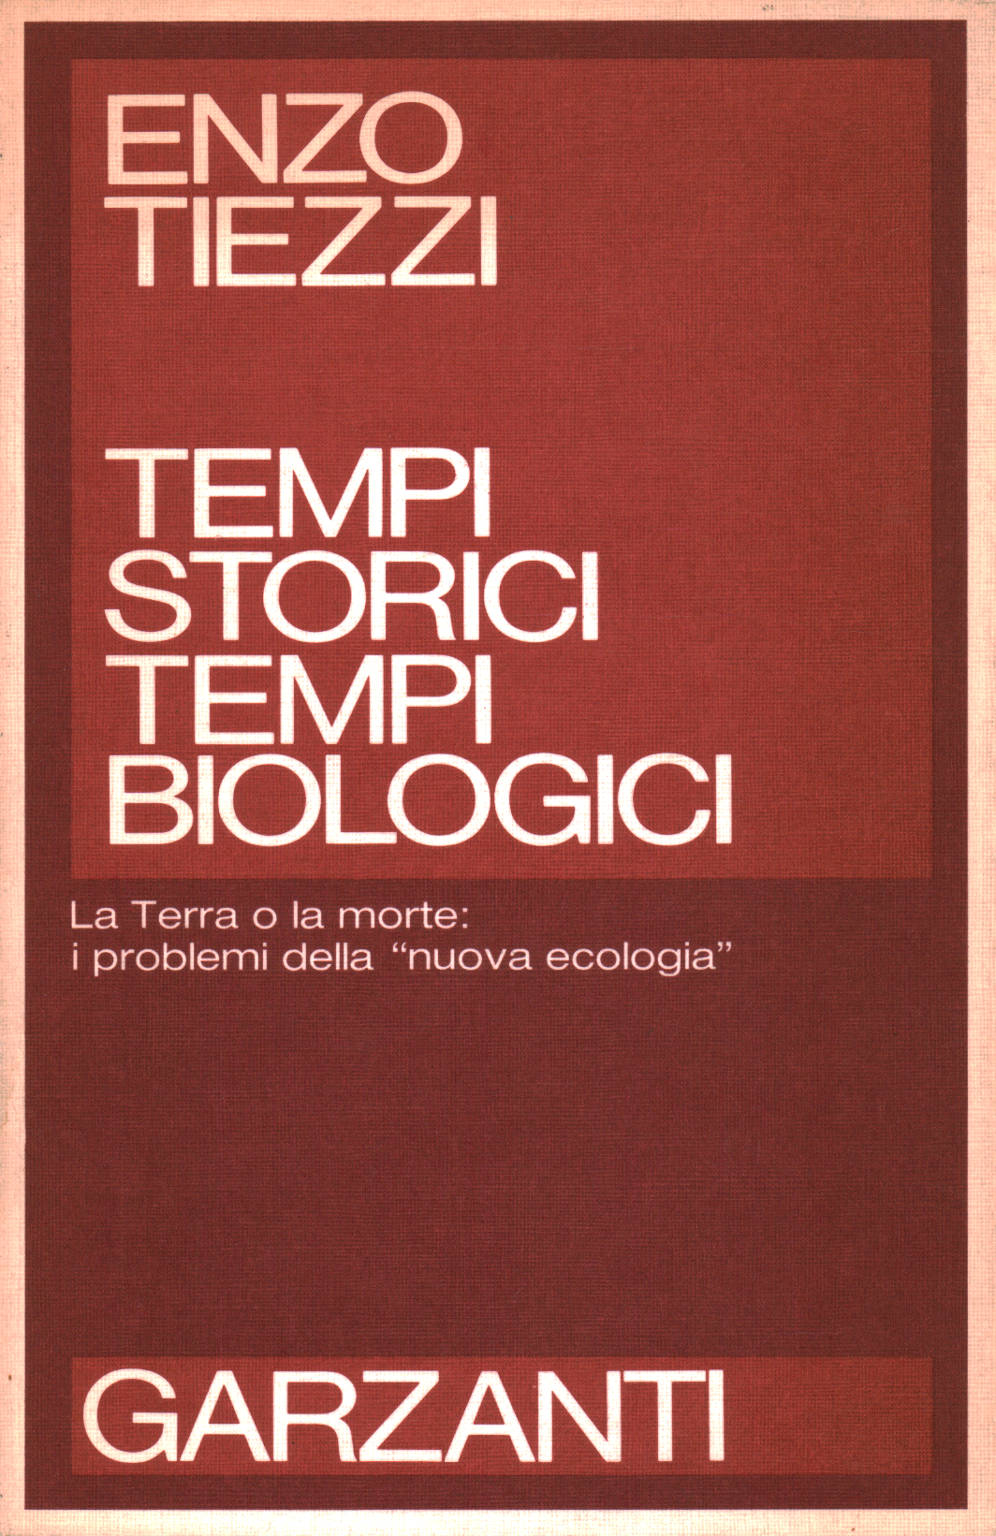 Historical times, biological times, Enzo Tiezzi